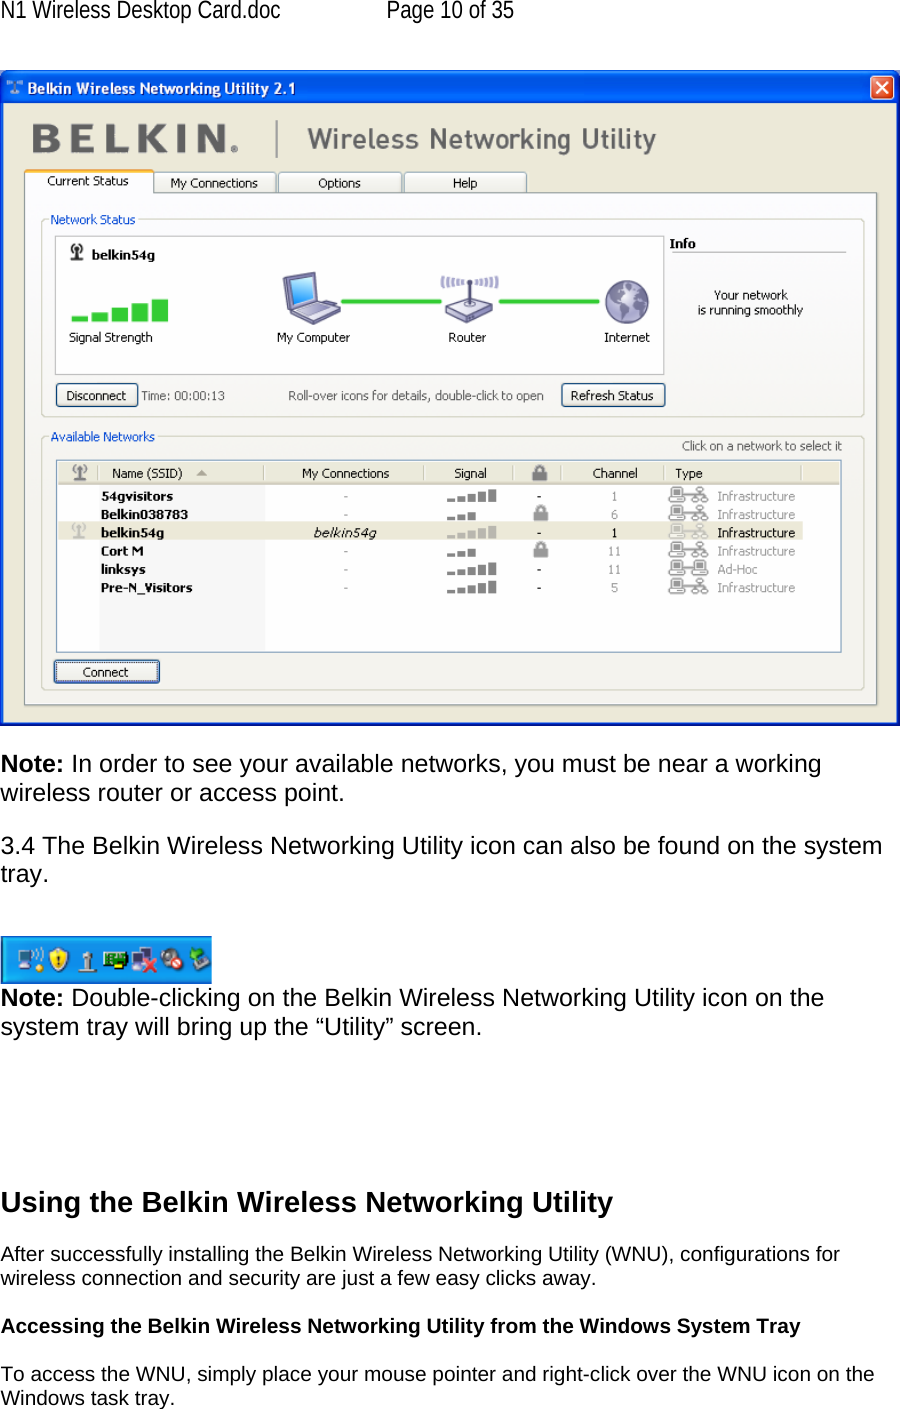 N1 Wireless Desktop Card.doc  Page 10 of 35   Note: In order to see your available networks, you must be near a working wireless router or access point.  3.4 The Belkin Wireless Networking Utility icon can also be found on the system tray.    Note: Double-clicking on the Belkin Wireless Networking Utility icon on the system tray will bring up the “Utility” screen.       Using the Belkin Wireless Networking Utility   After successfully installing the Belkin Wireless Networking Utility (WNU), configurations for wireless connection and security are just a few easy clicks away.  Accessing the Belkin Wireless Networking Utility from the Windows System Tray  To access the WNU, simply place your mouse pointer and right-click over the WNU icon on the Windows task tray.  